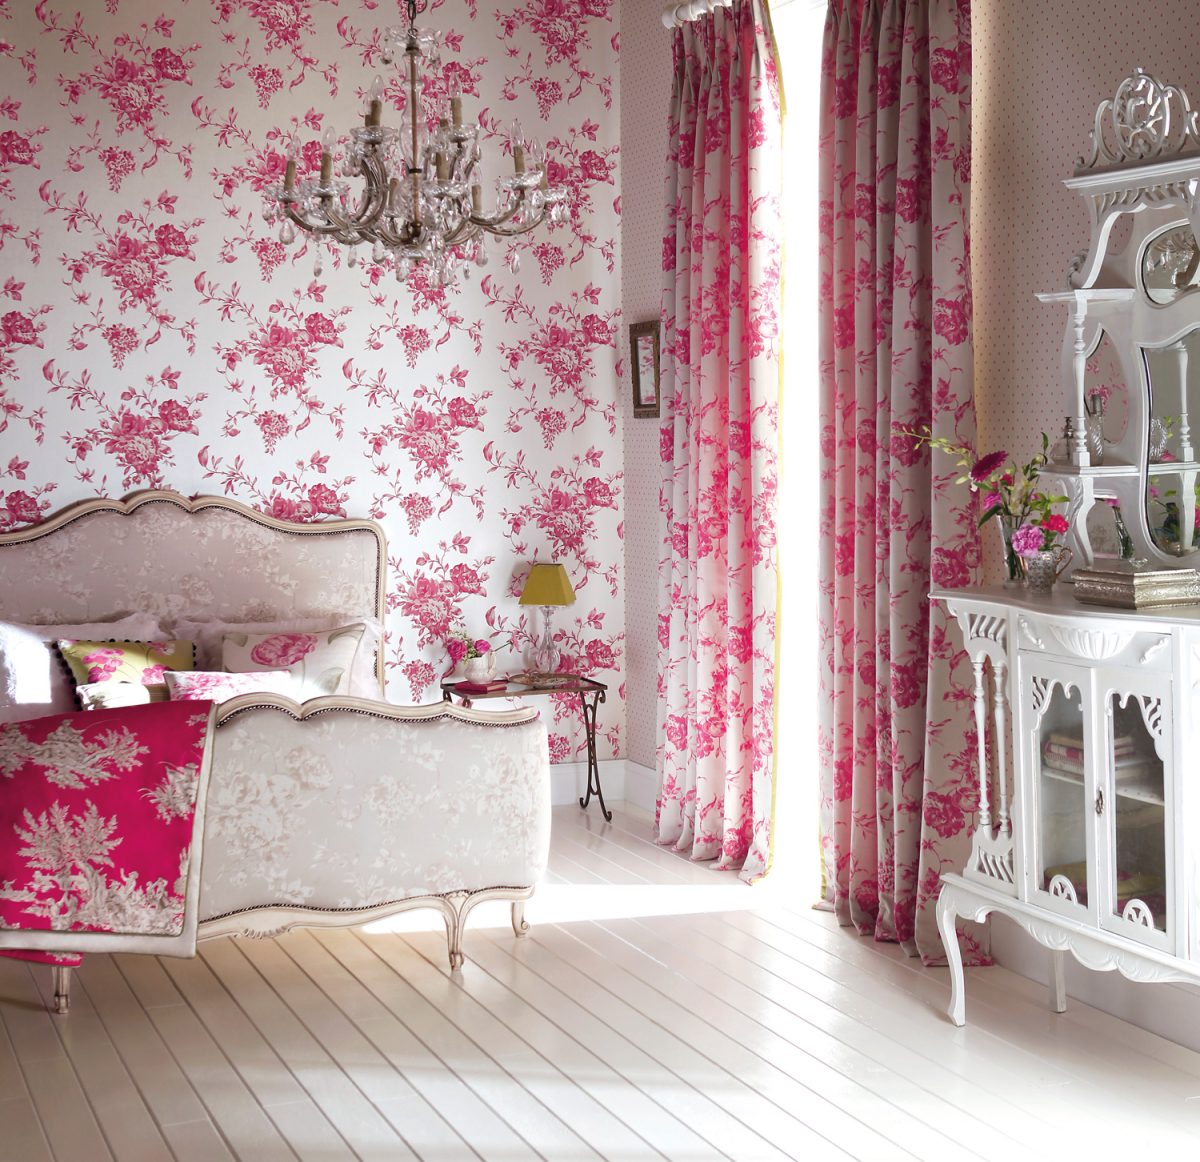 Interior of a contemporary bedroom with floral pattern wallpaper and curtains with classic style furniture

